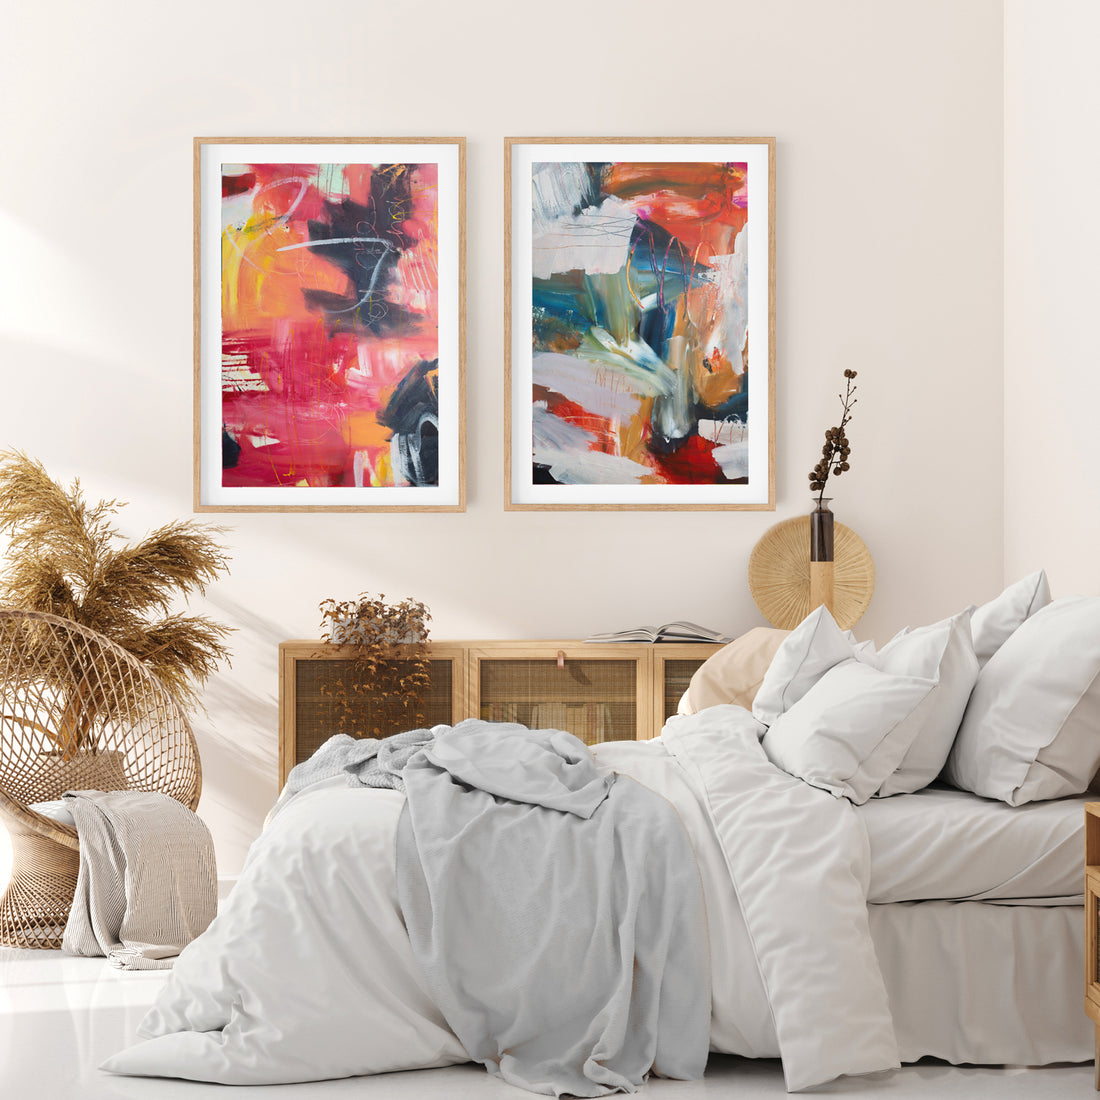 5 Ways Art Can Transform Your Home And Your Heart